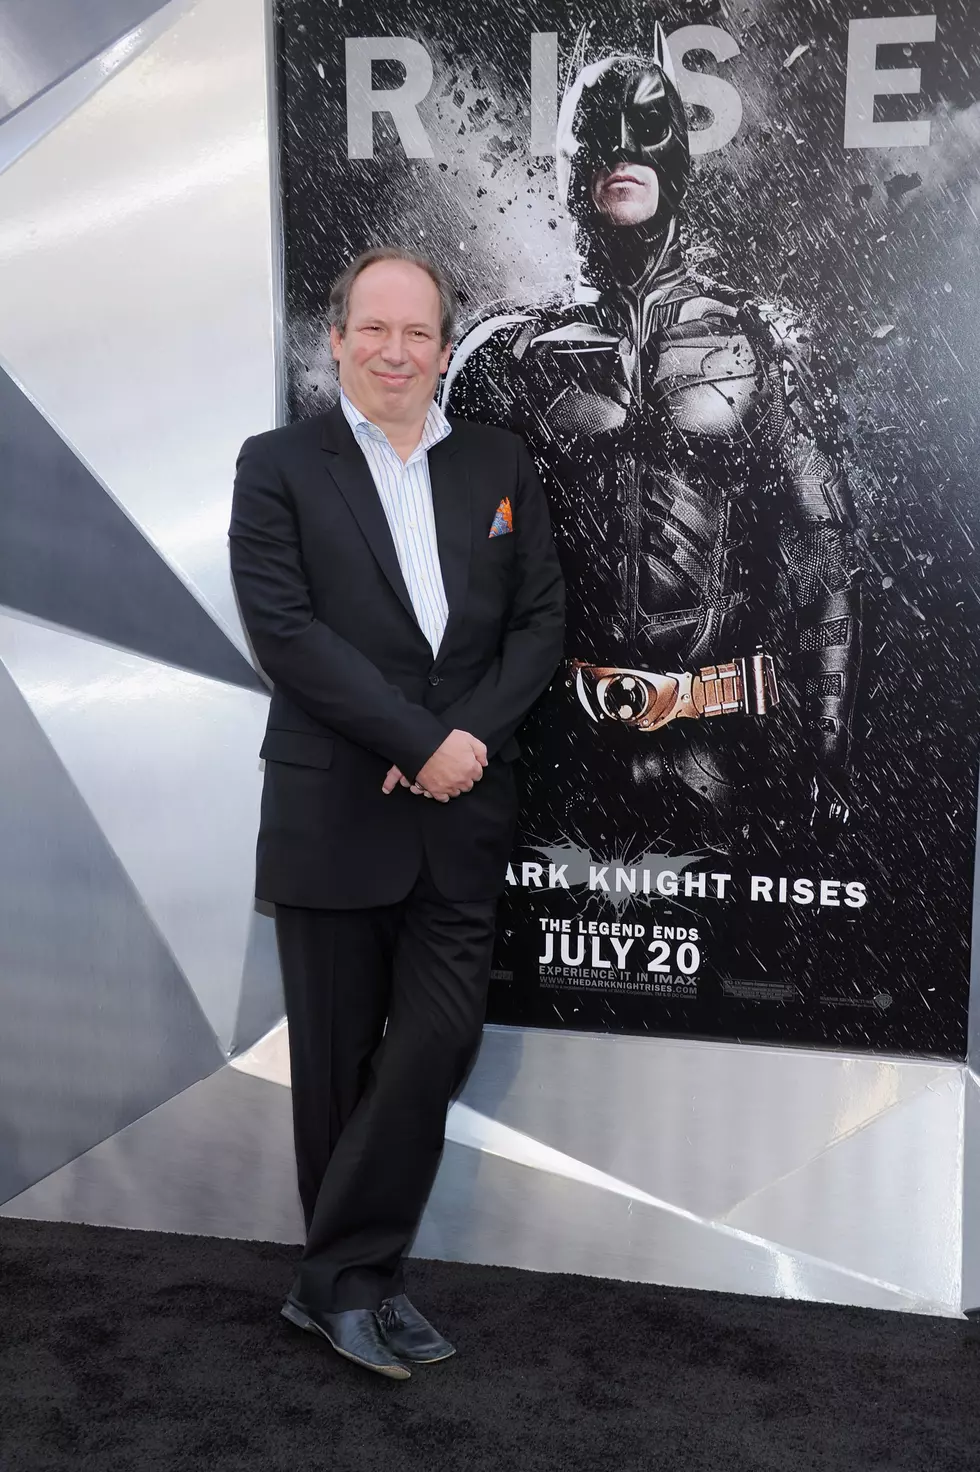 Music Composer From “The Dark Knight Rises” Releases Song For Colorado Victims (VIDEO)